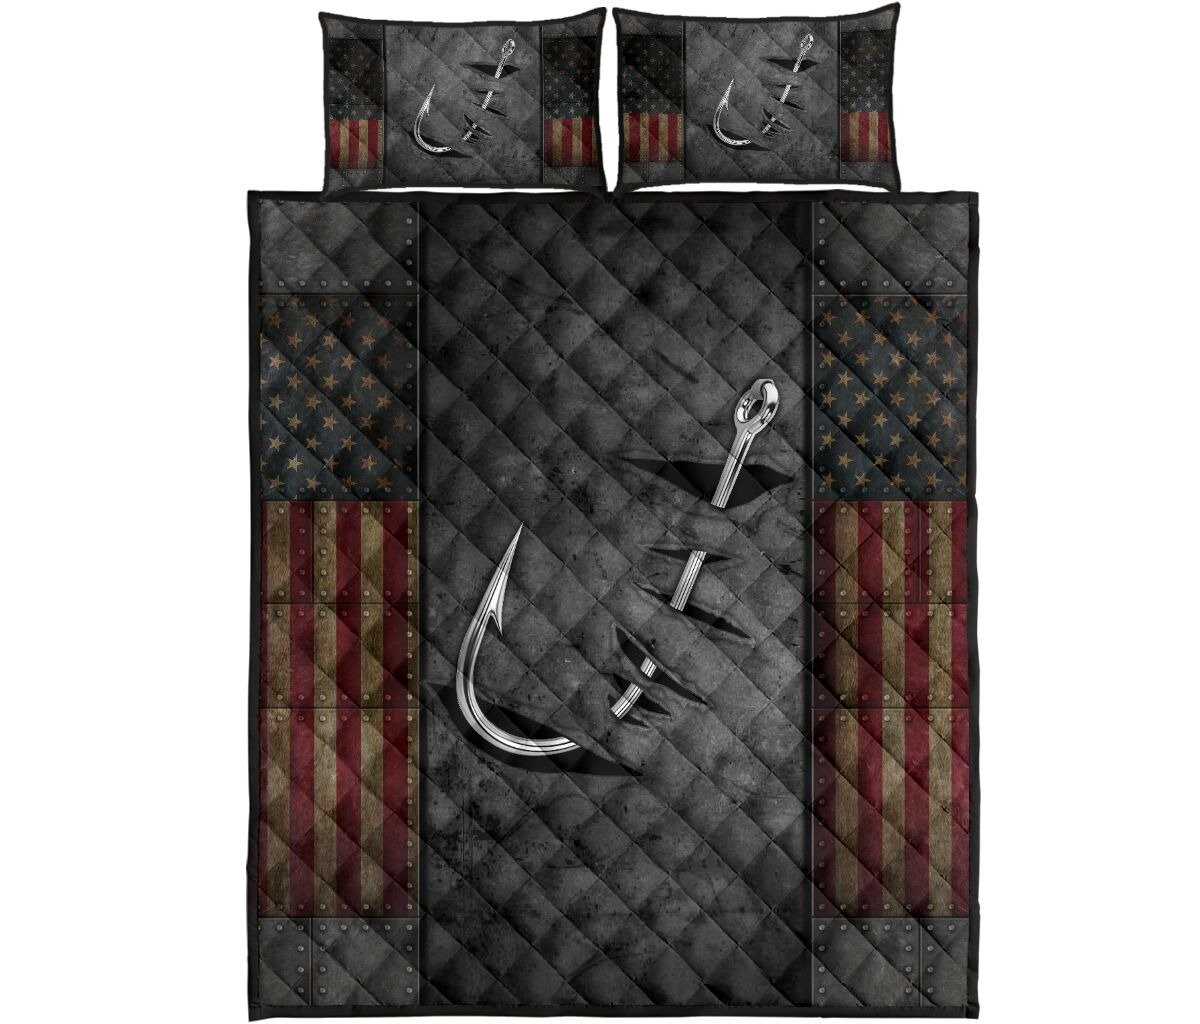 Crack Fishing American flag bedding set and pillow cover4